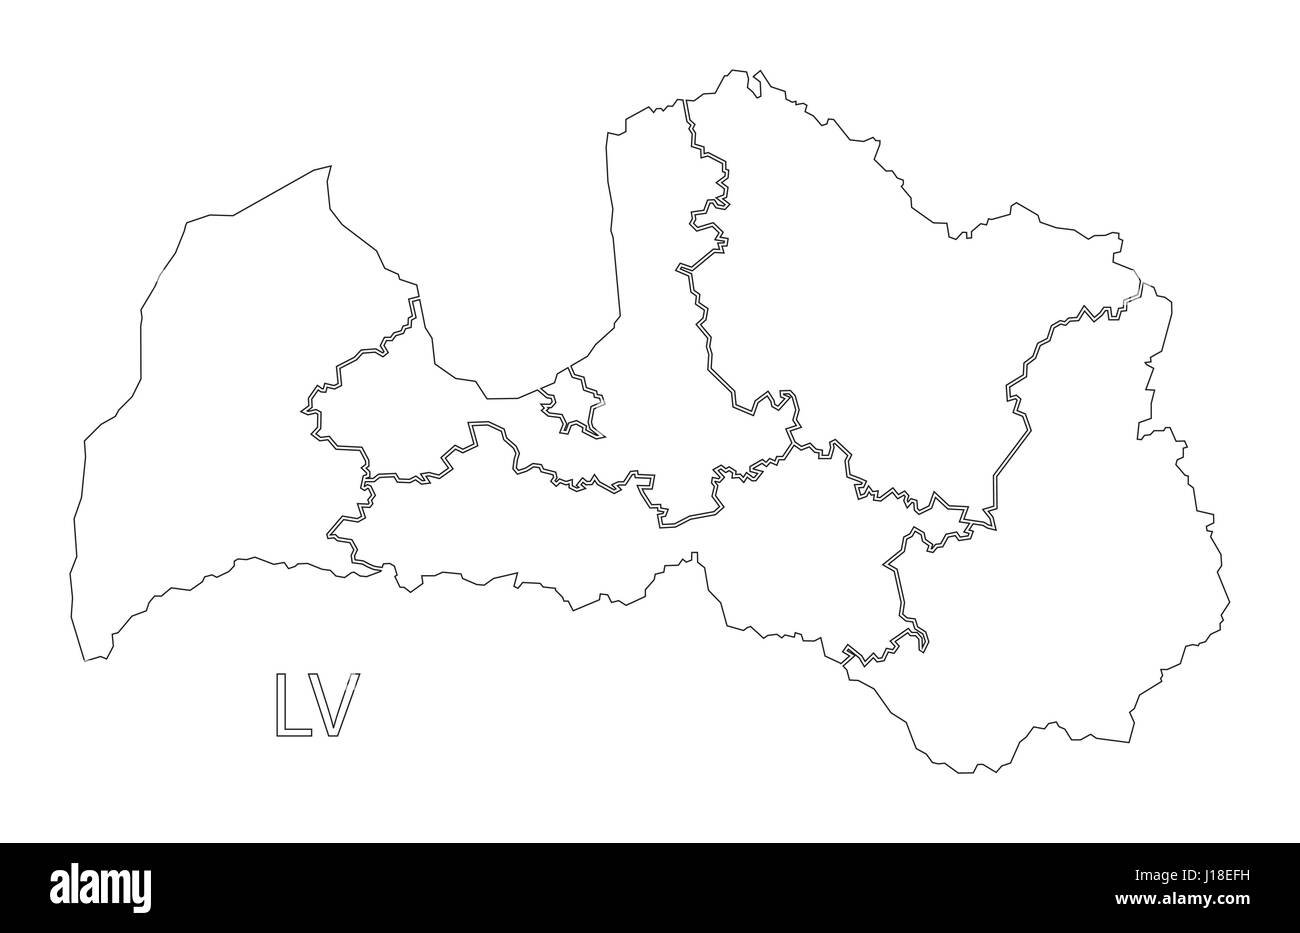 Latvia Outline Silhouette Map Illustration With Regions Stock